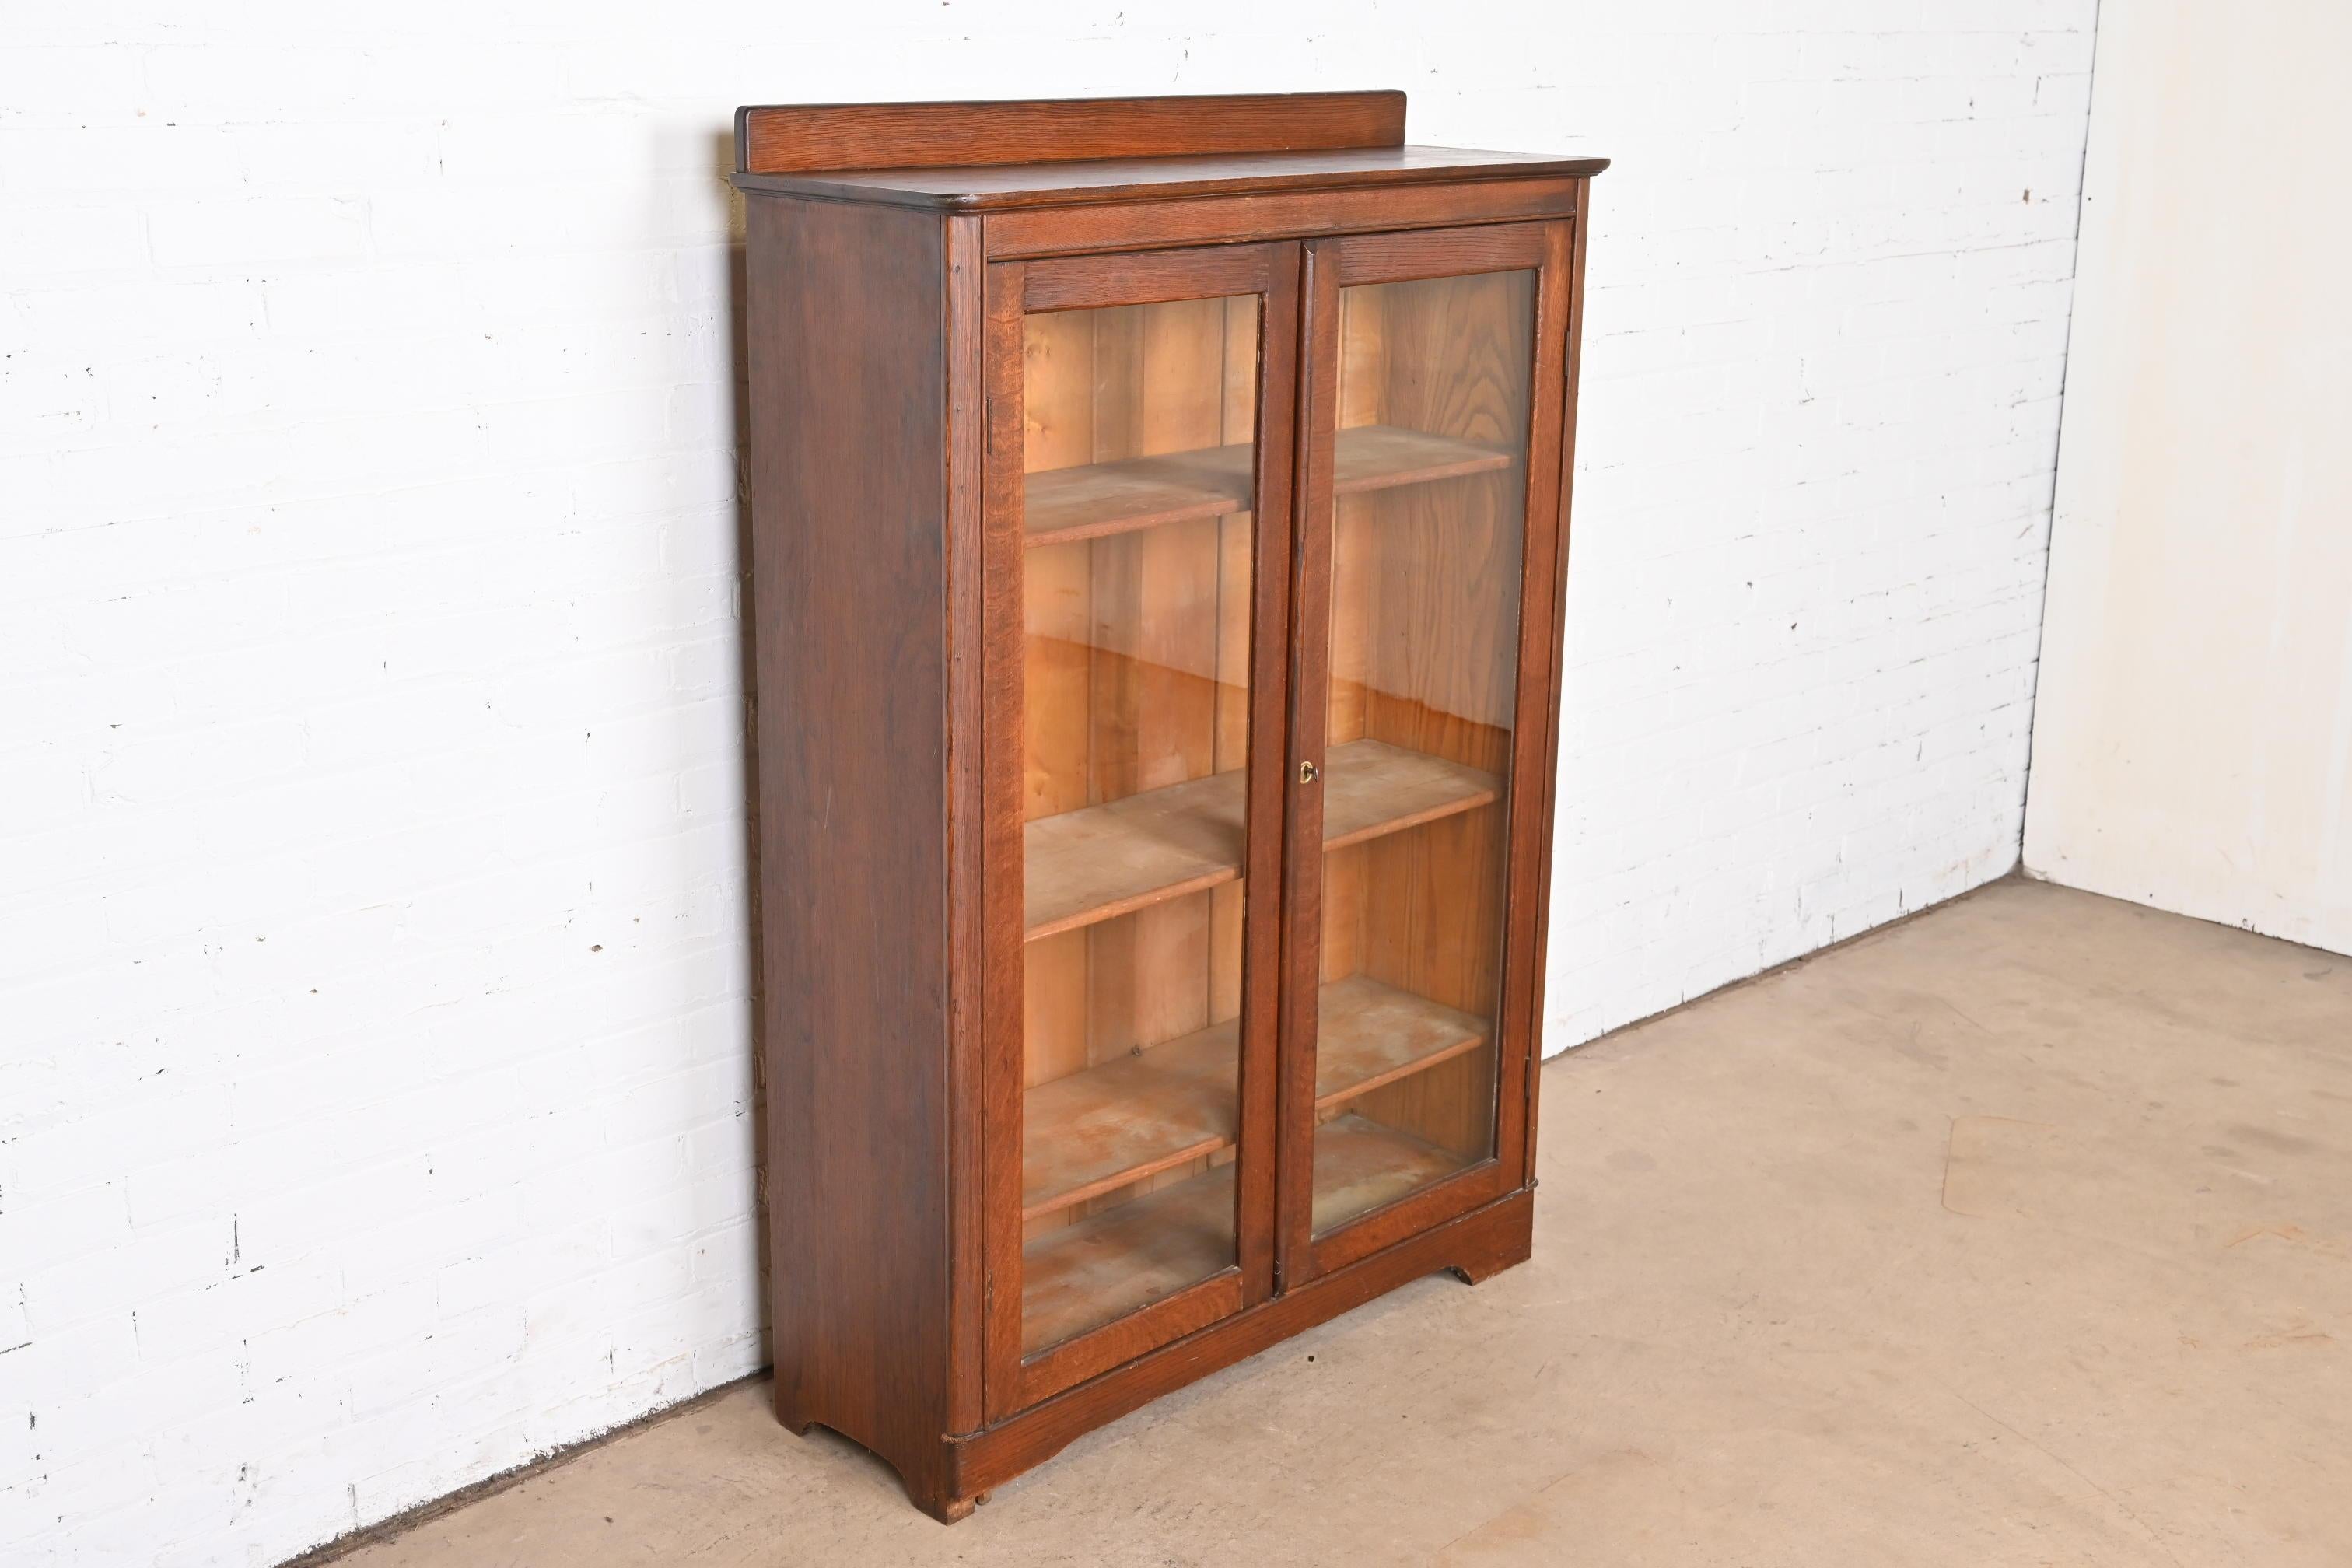 Antique Arts & Crafts Glass Front Bookcase by Larkin Co., Circa 1900 In Good Condition For Sale In South Bend, IN